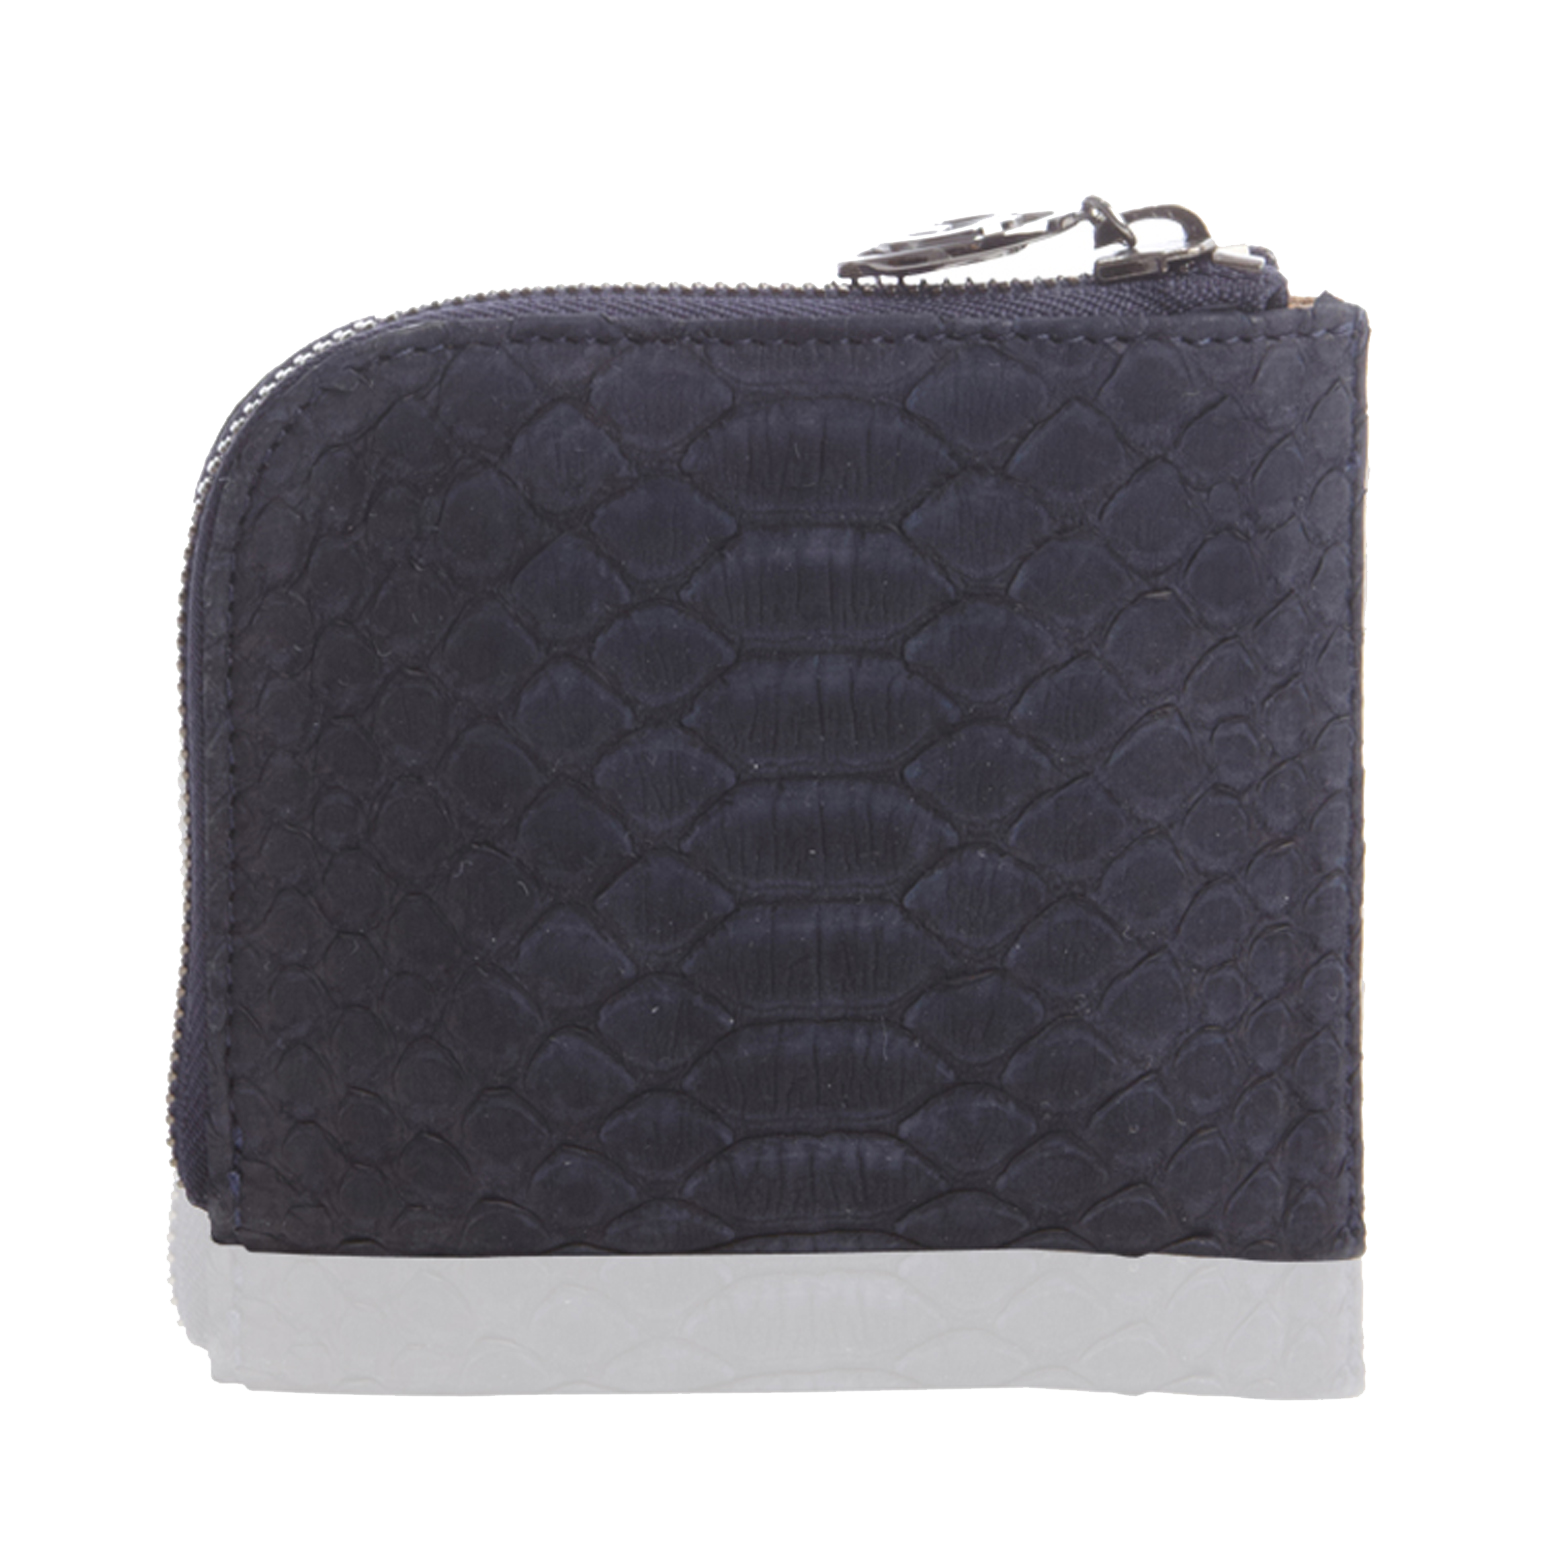 Small Square Zip Around Wallet - Navy